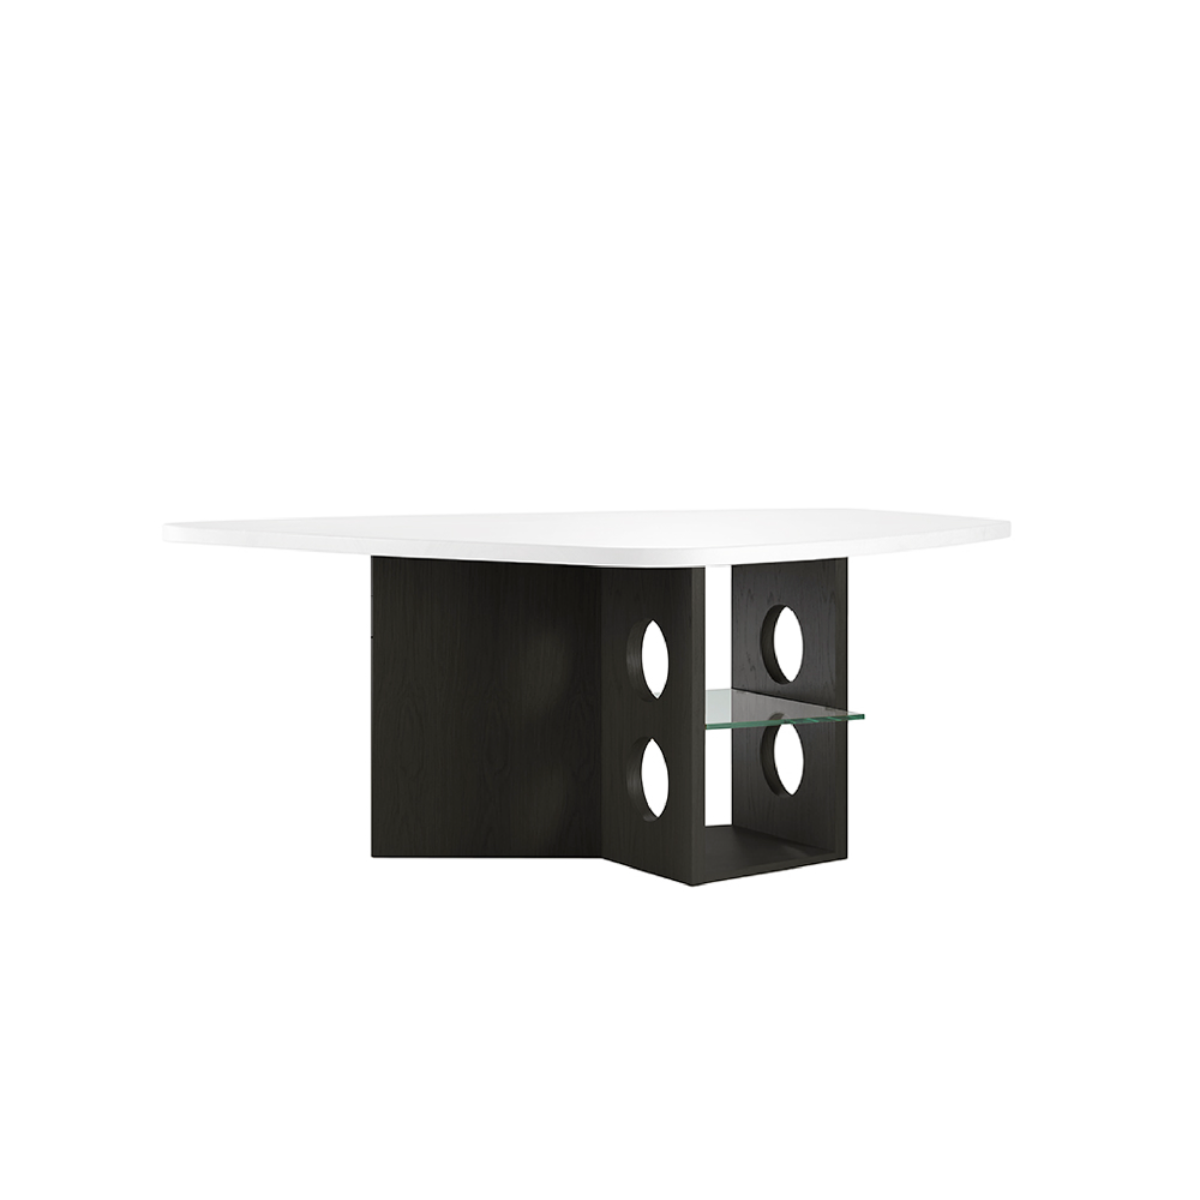 TECTA [GIFT] M21-1/M21 Dining, Conference or Executive Desk - White / Black